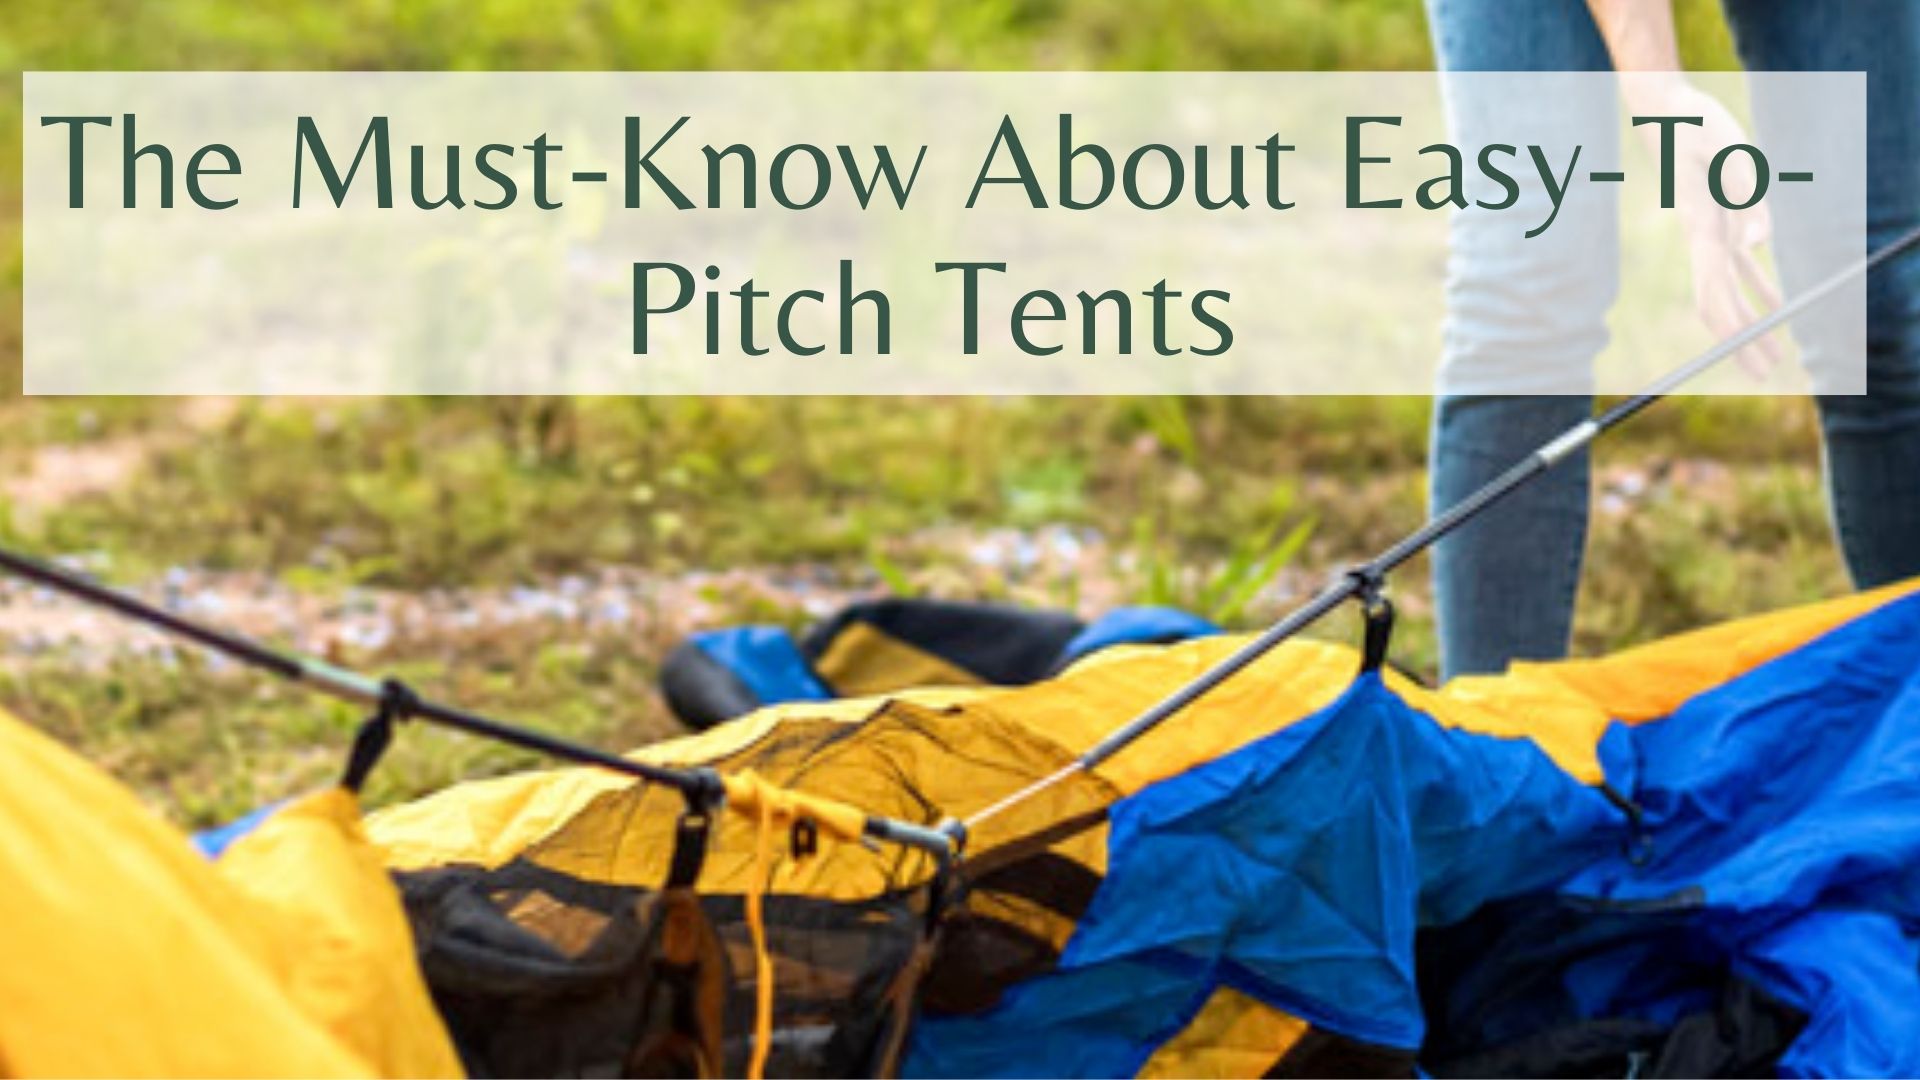 The Must-Know About Easy-To-Pitch Tents